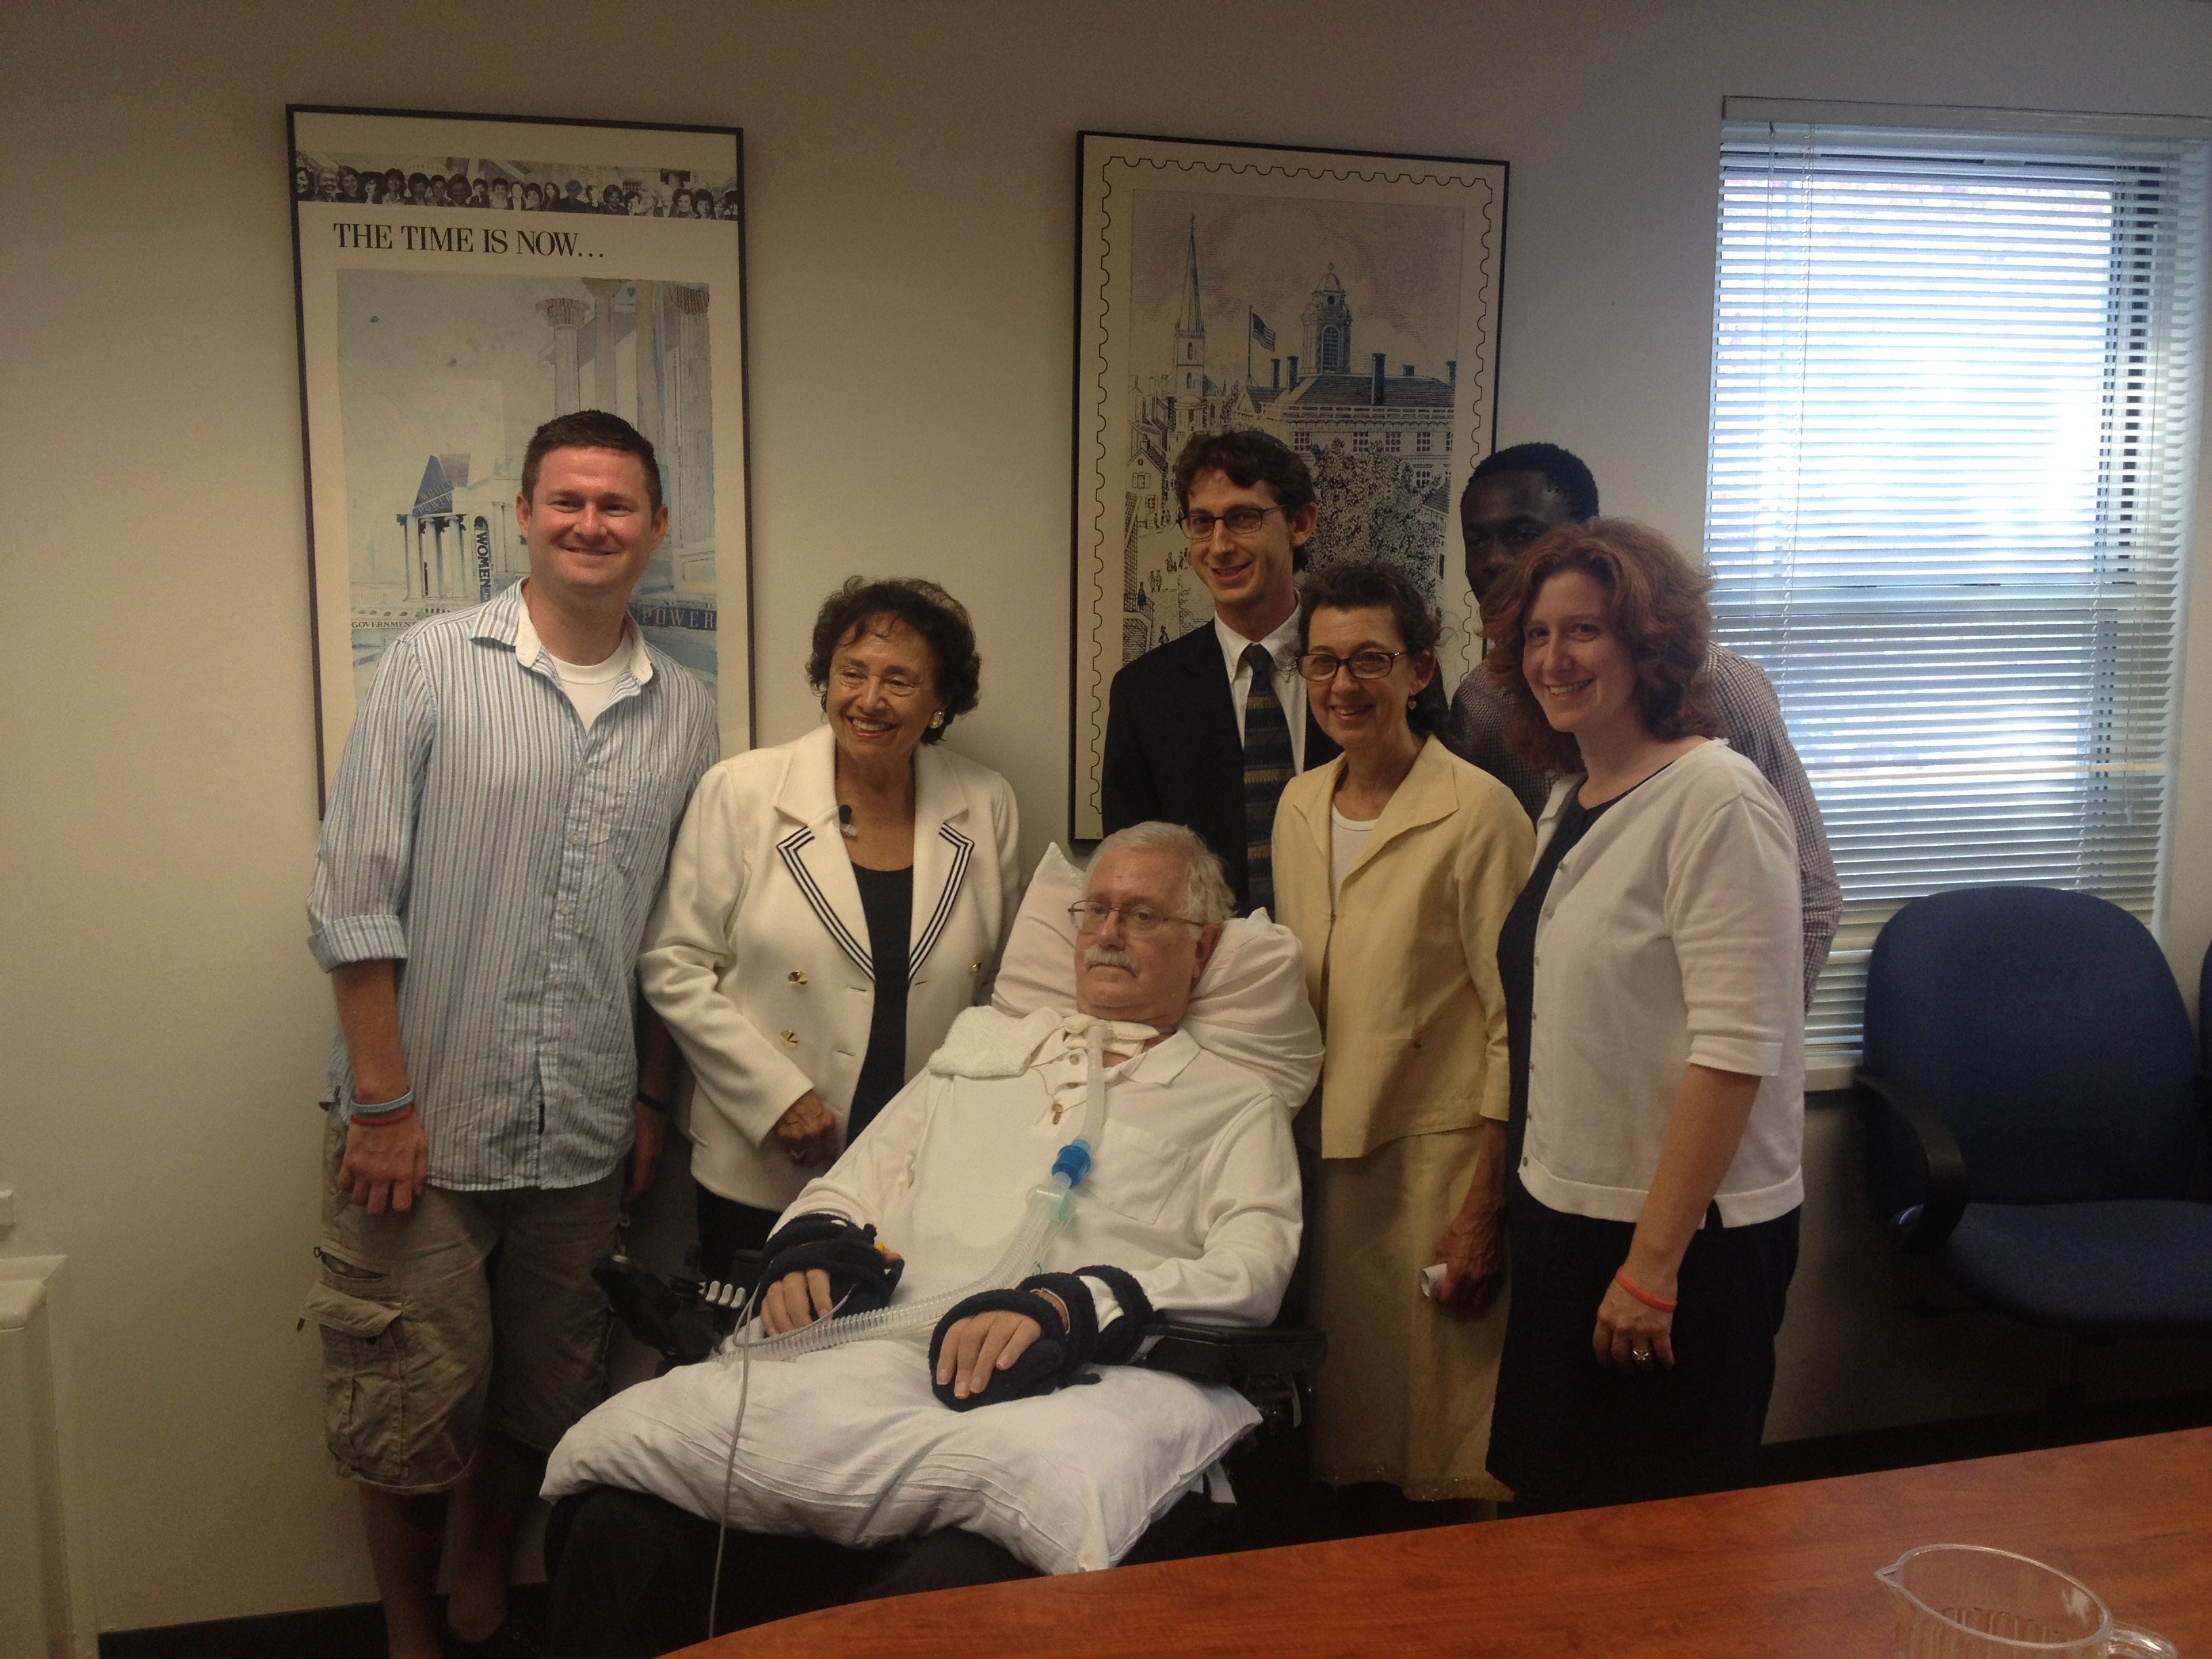 From left: Pat Quinn (co-creator of the ALS Ice Bucket Challenge), New York Congresswoman Nita Lowey, Daniel's father, Daniel, his mother, Max (one of Daniel's dad's nurses), and Daniel's sister.